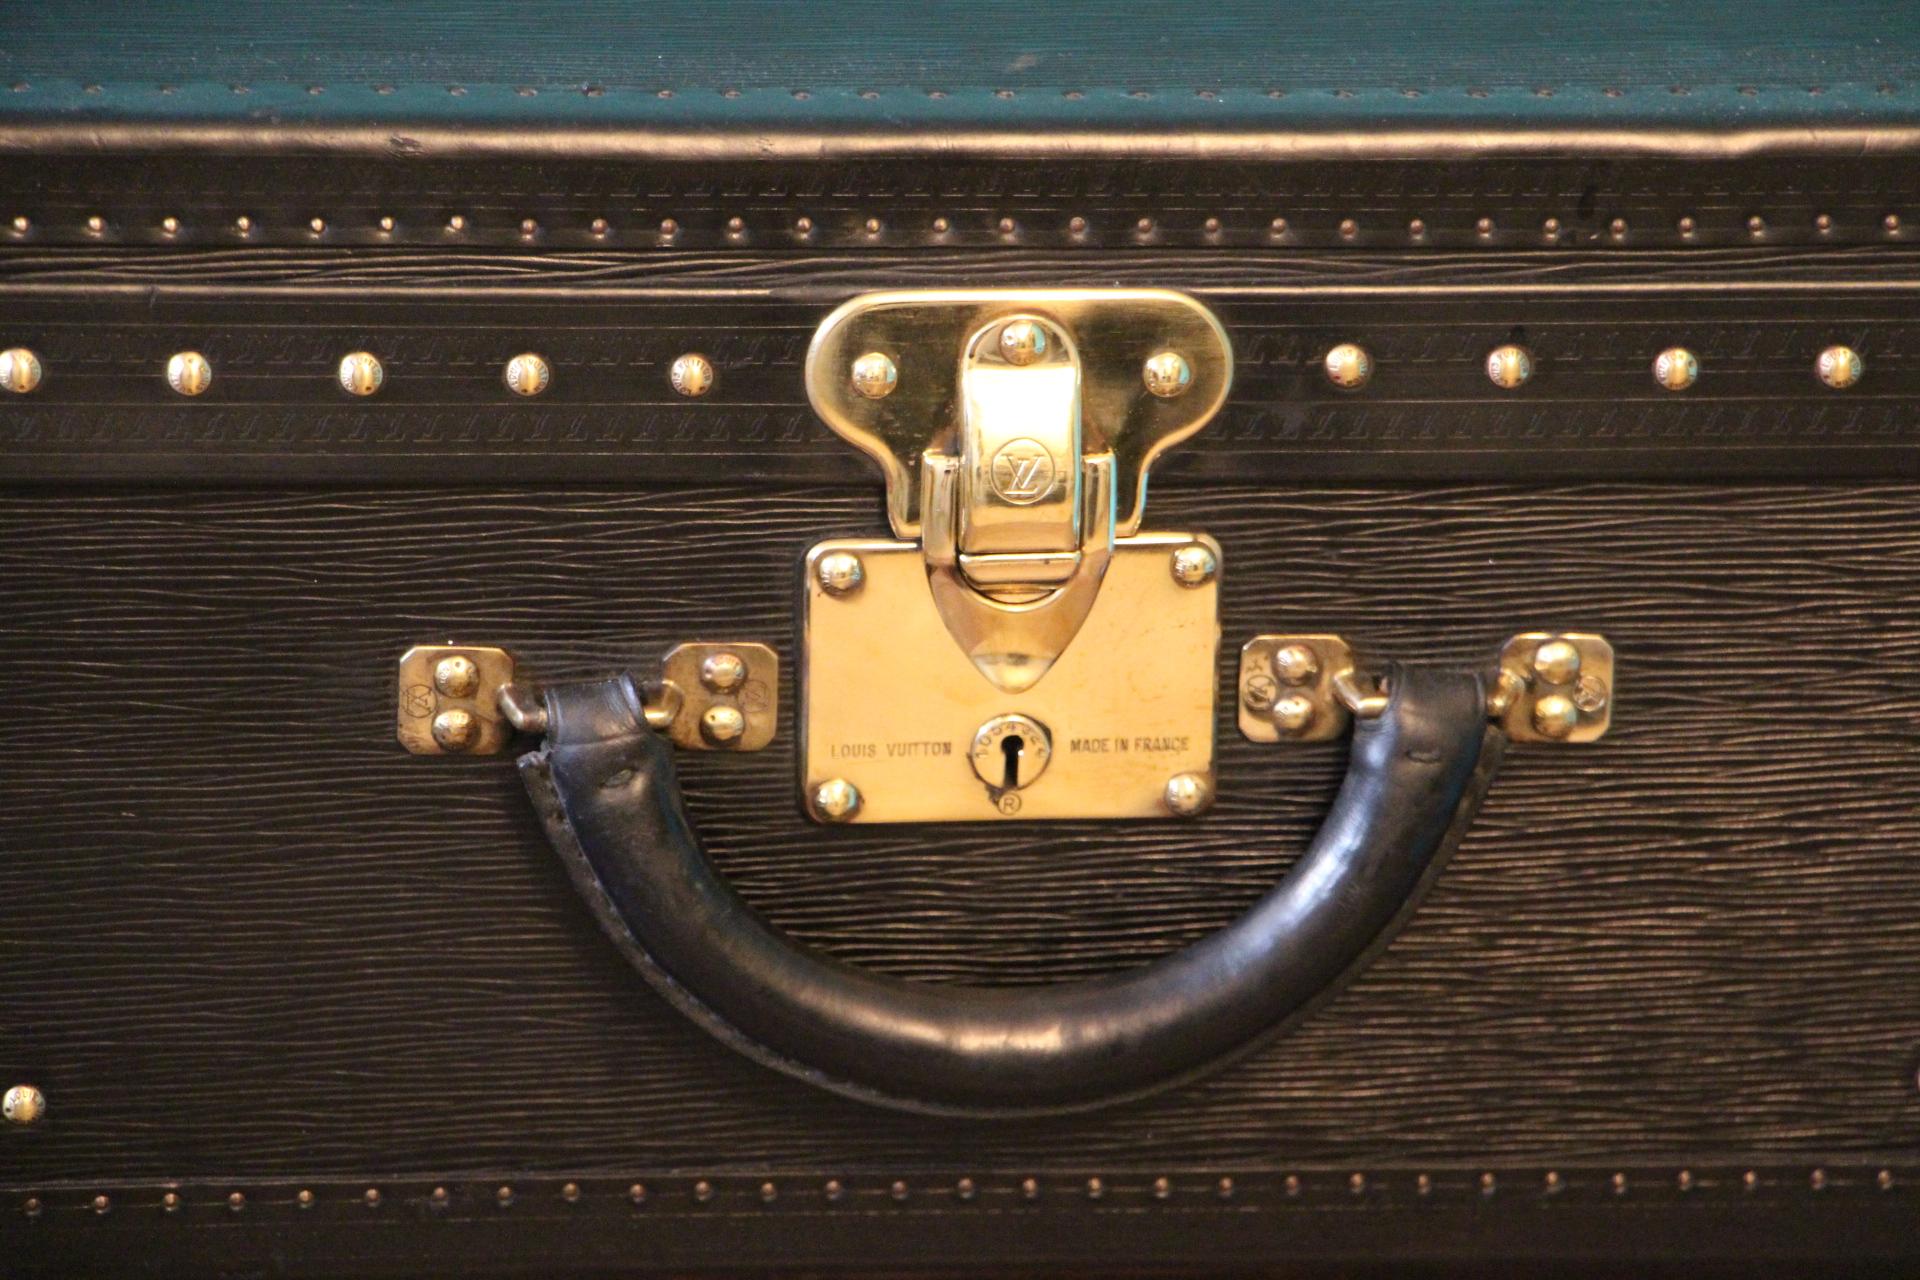 This top of the range all black leather Alzer 70 rigid suitcase features black leather trim, all solid brass LV stamped lock, clasps and studs. Large leather handle.
Its interior is in excellent condition, as new. It is lined in grey suede, with